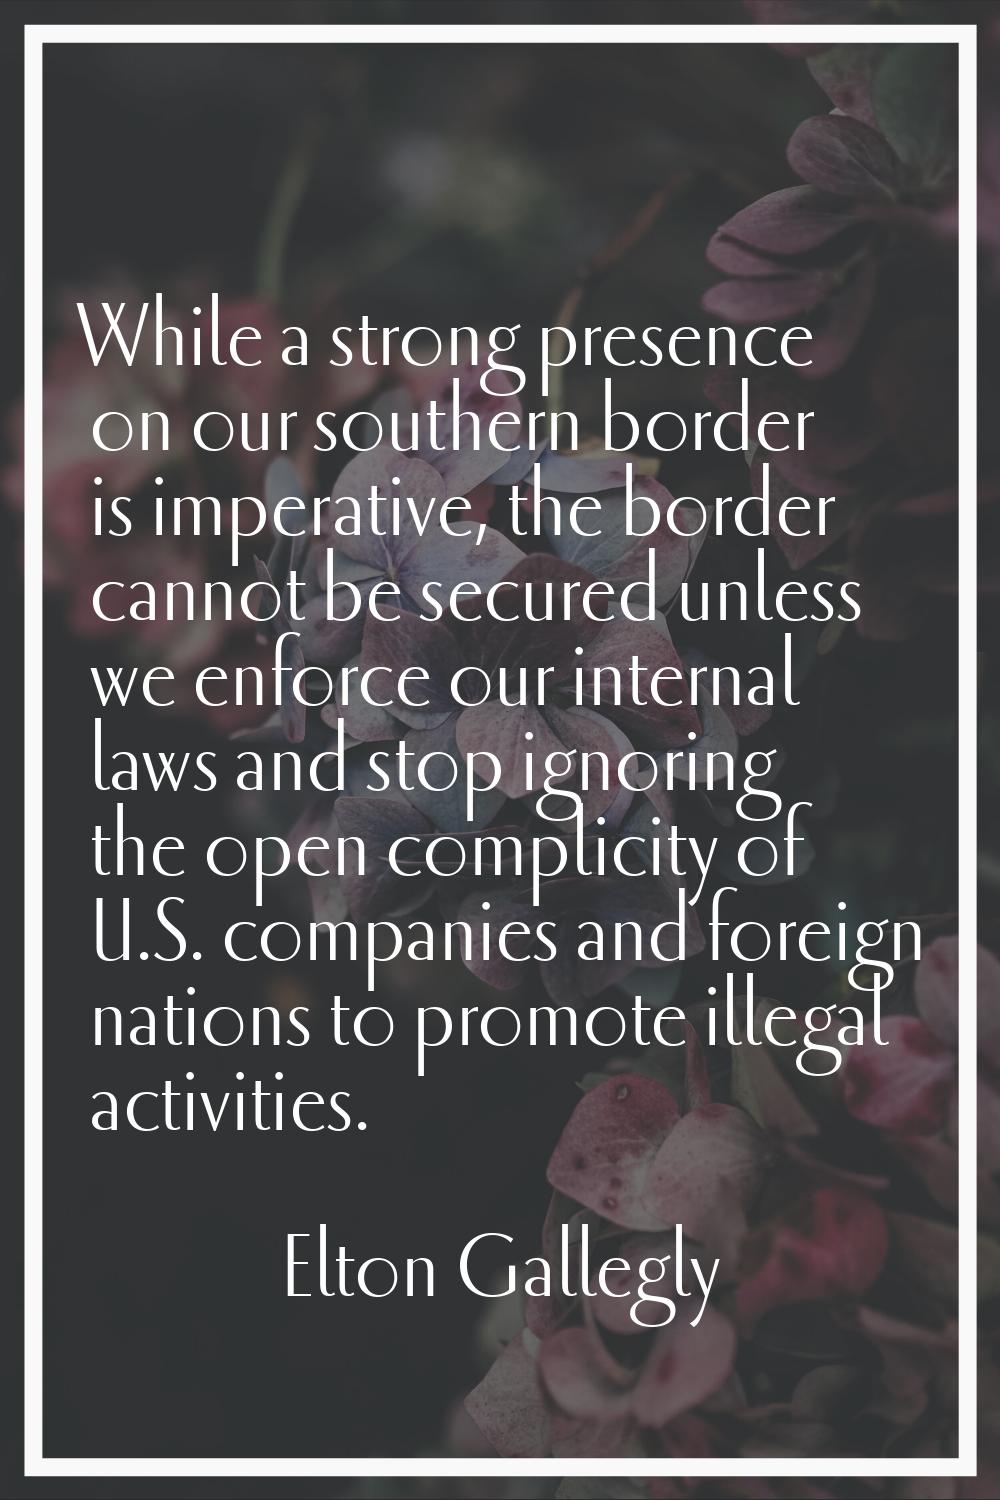 While a strong presence on our southern border is imperative, the border cannot be secured unless w